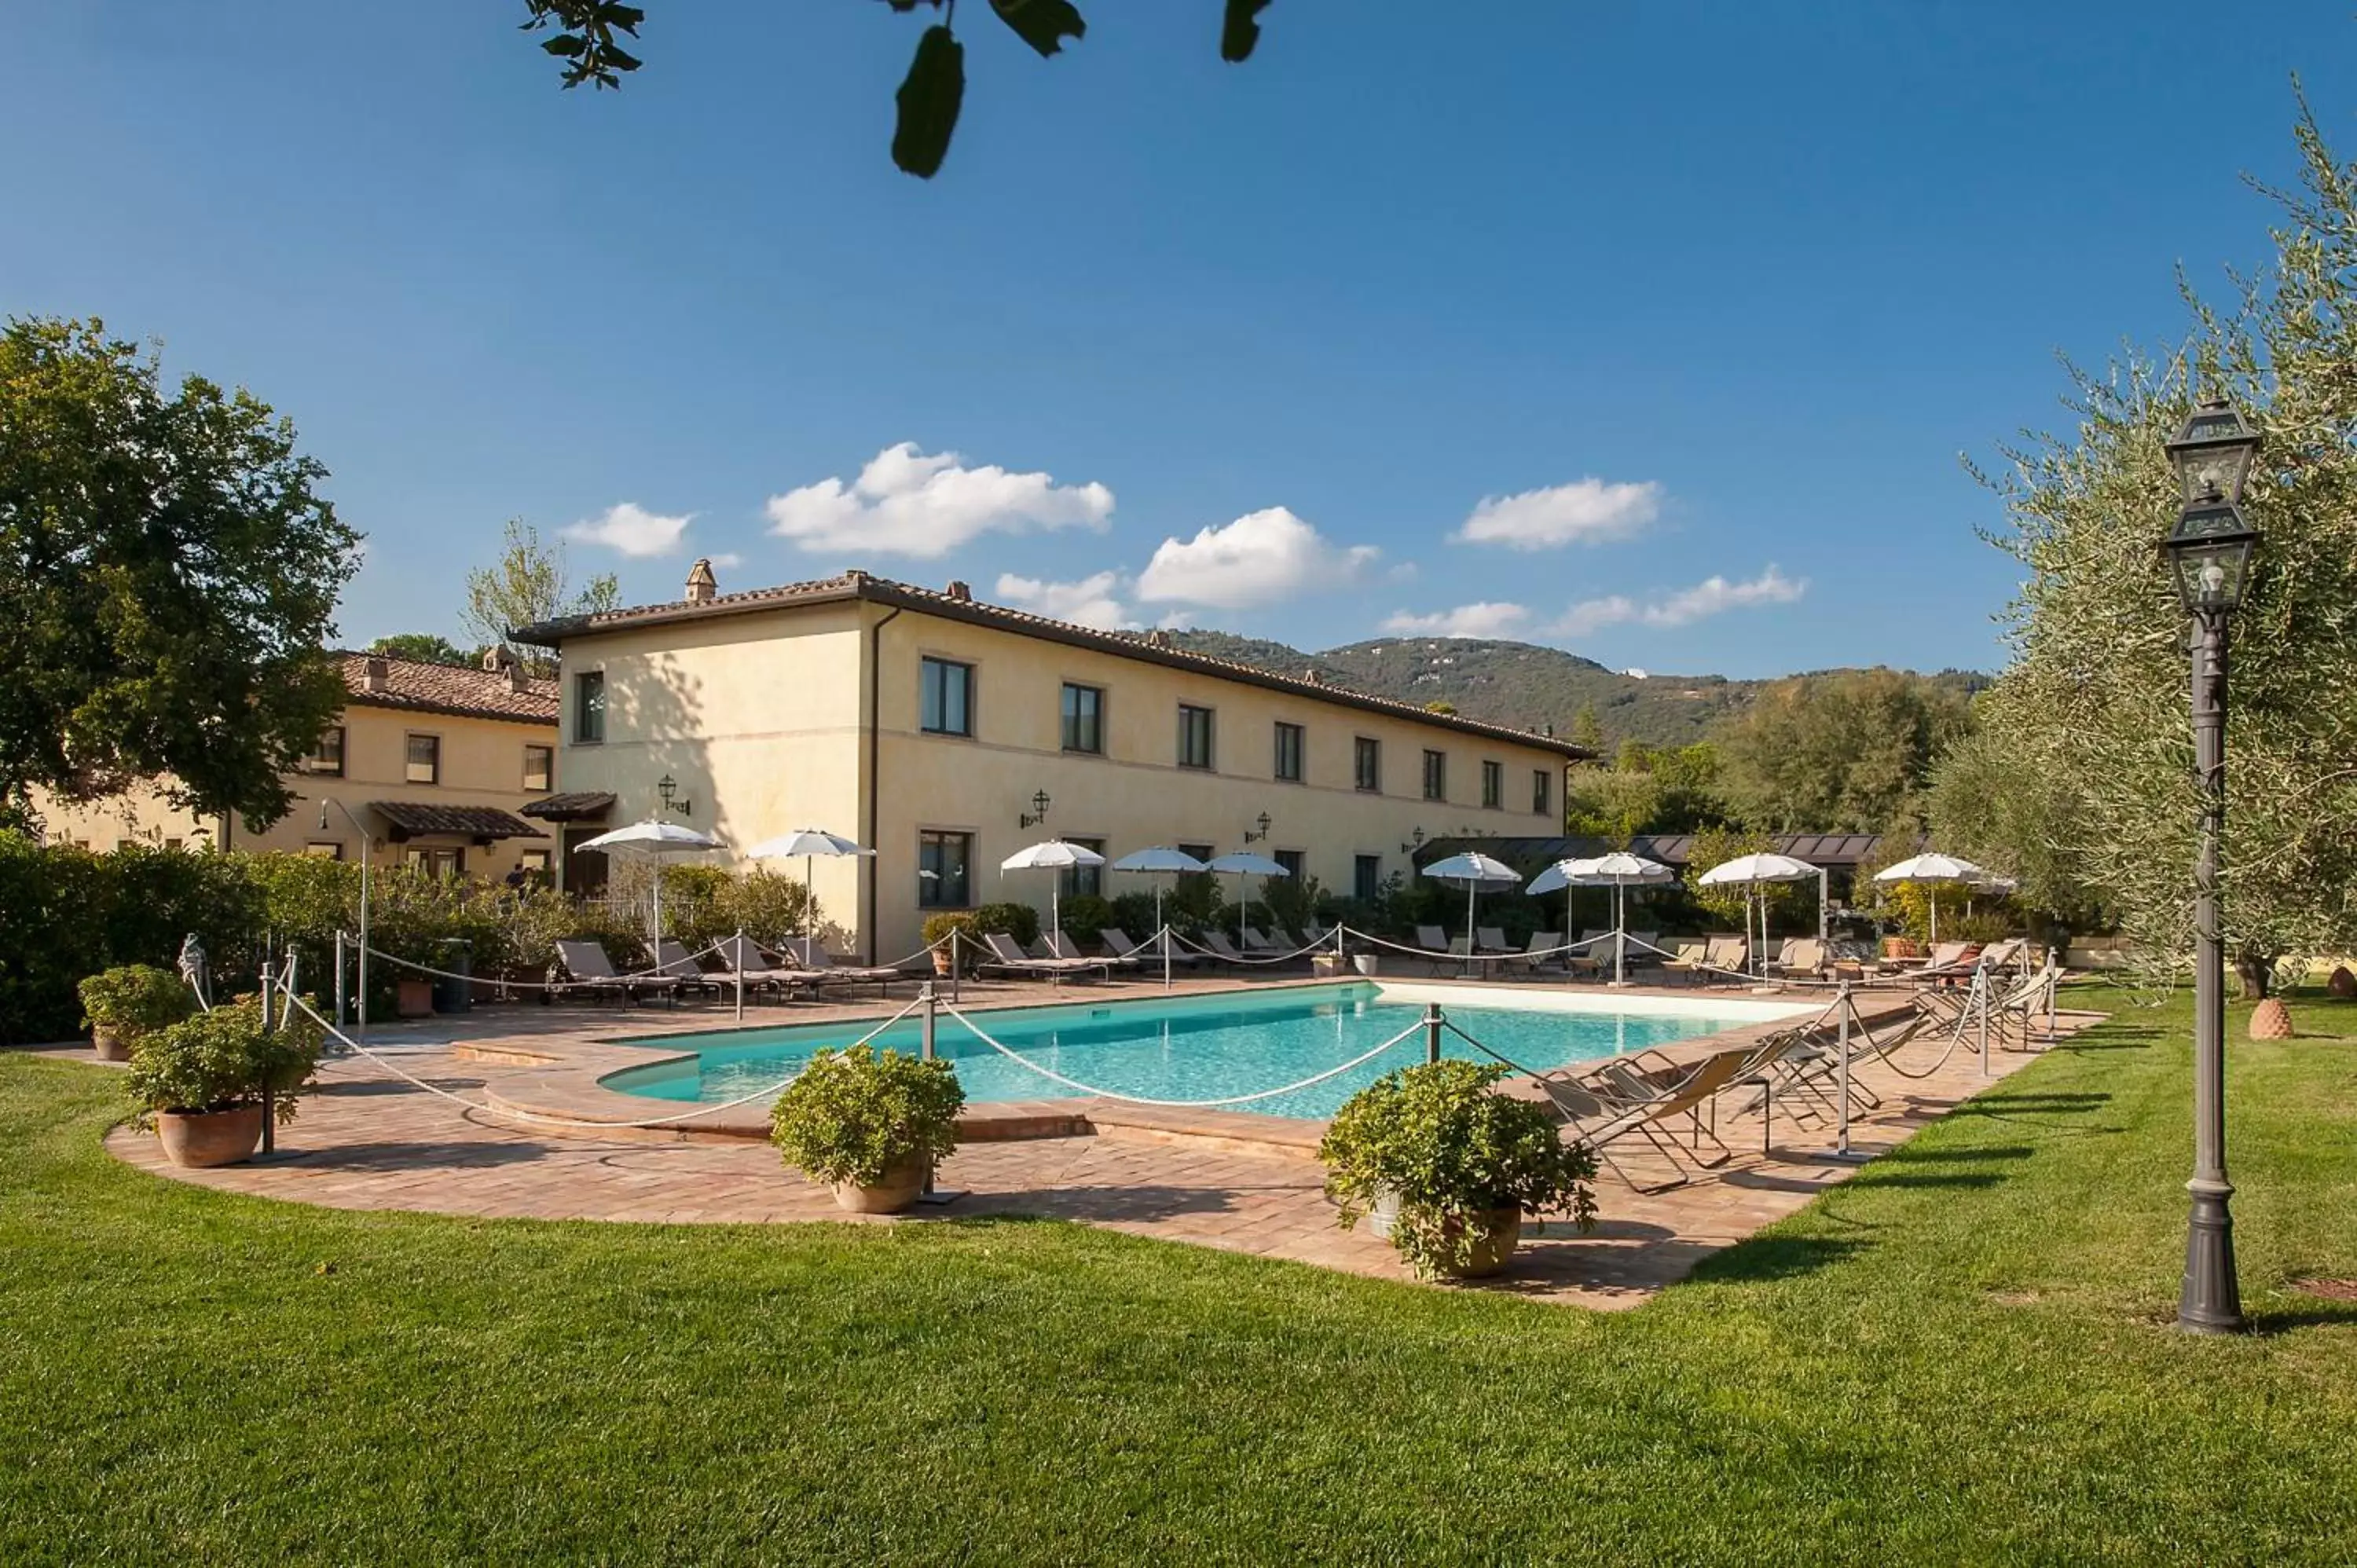 Swimming pool, Property Building in Relais dell'Olmo